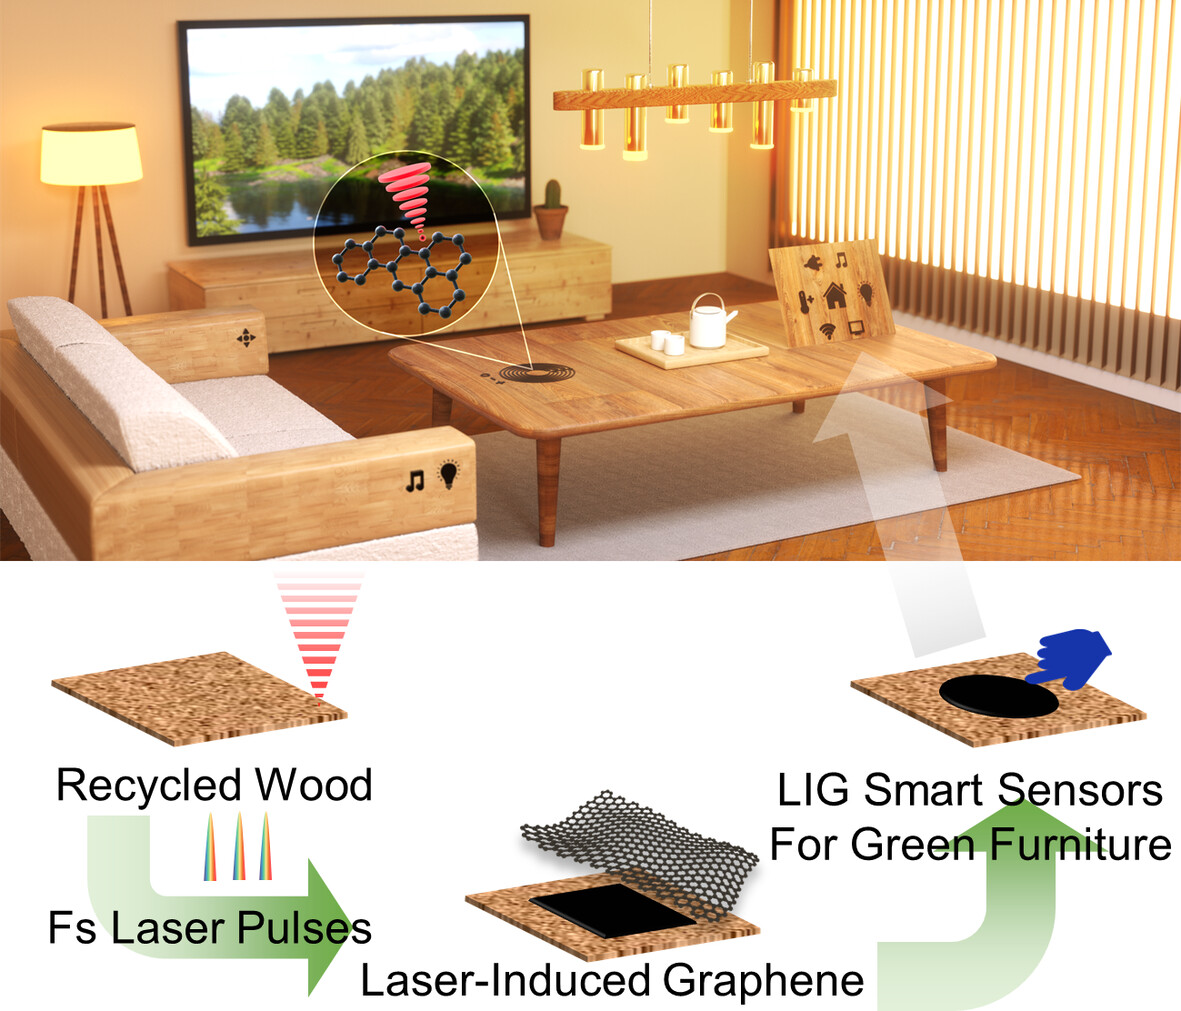 New #Research #Article about green smart furniture Laser-induced graphene formation on recycled woods for green smart furniture doi.org/10.1002/eom2.1… @WileyGlobal @wileyinresearch @Wiley_Chemistry @WileySTEM